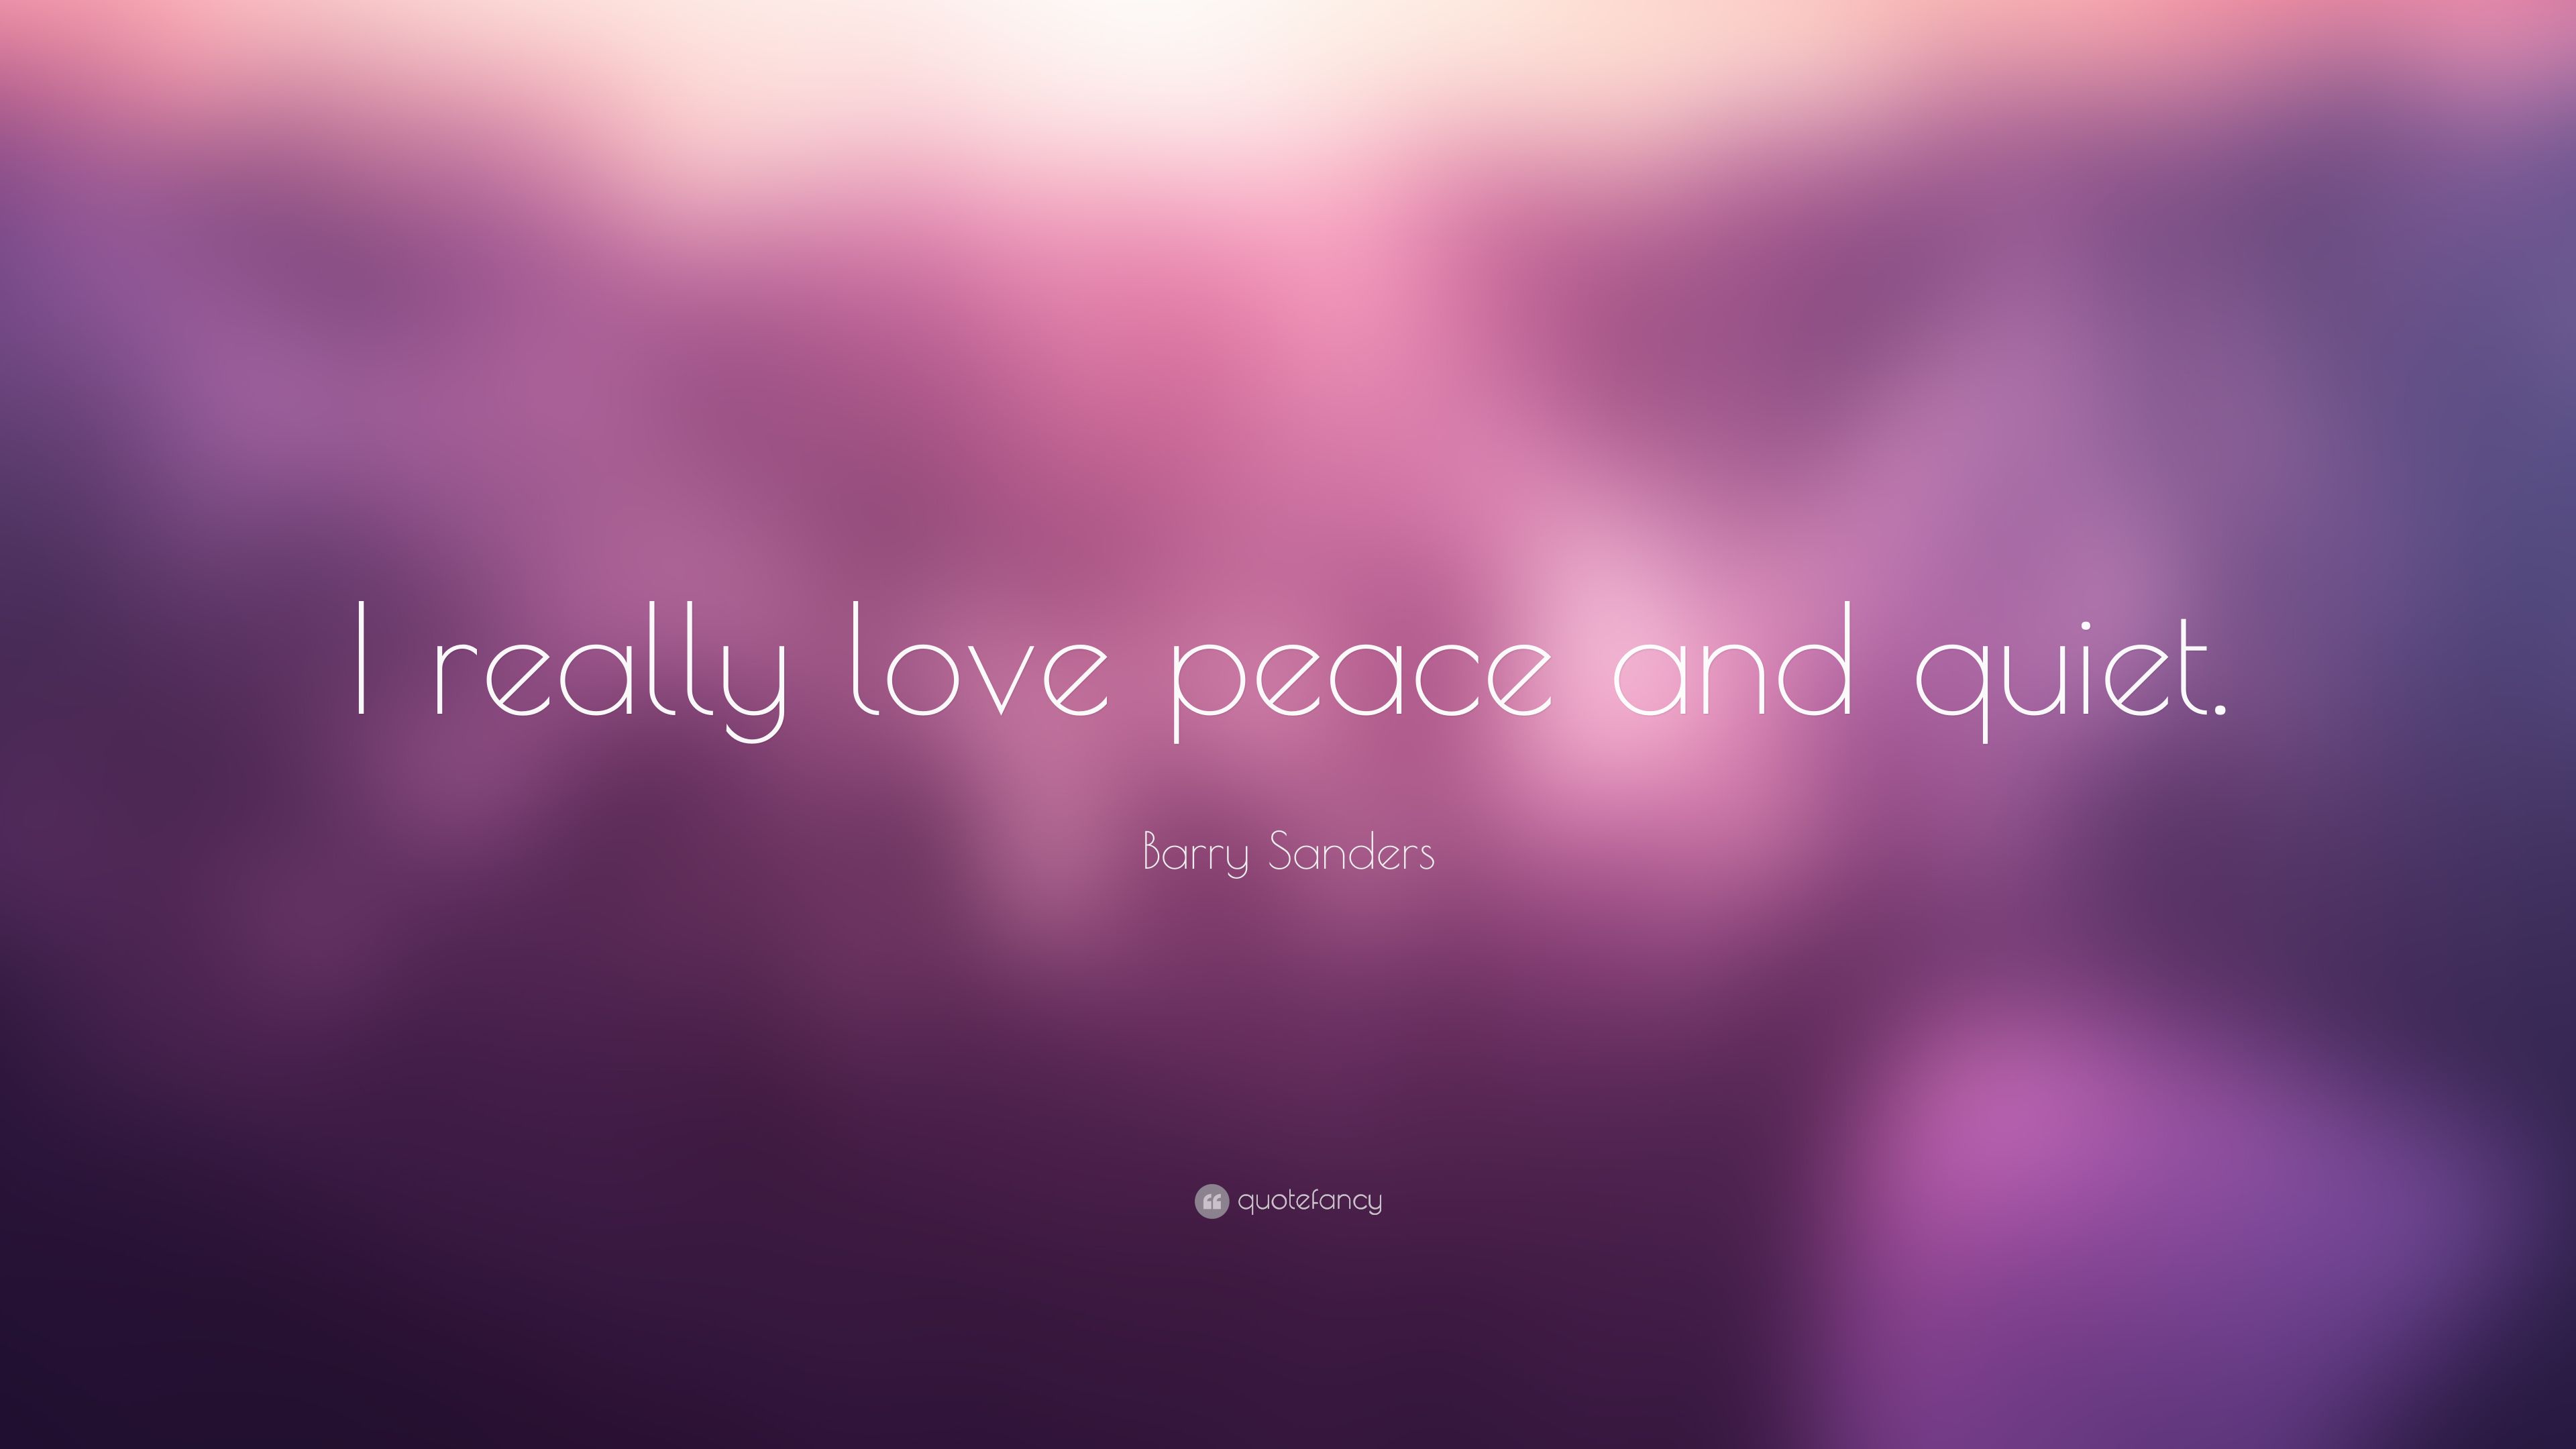 3840x2160 Barry Sanders Quote: “I really love peace and quiet.” 7 on WallpaperBat